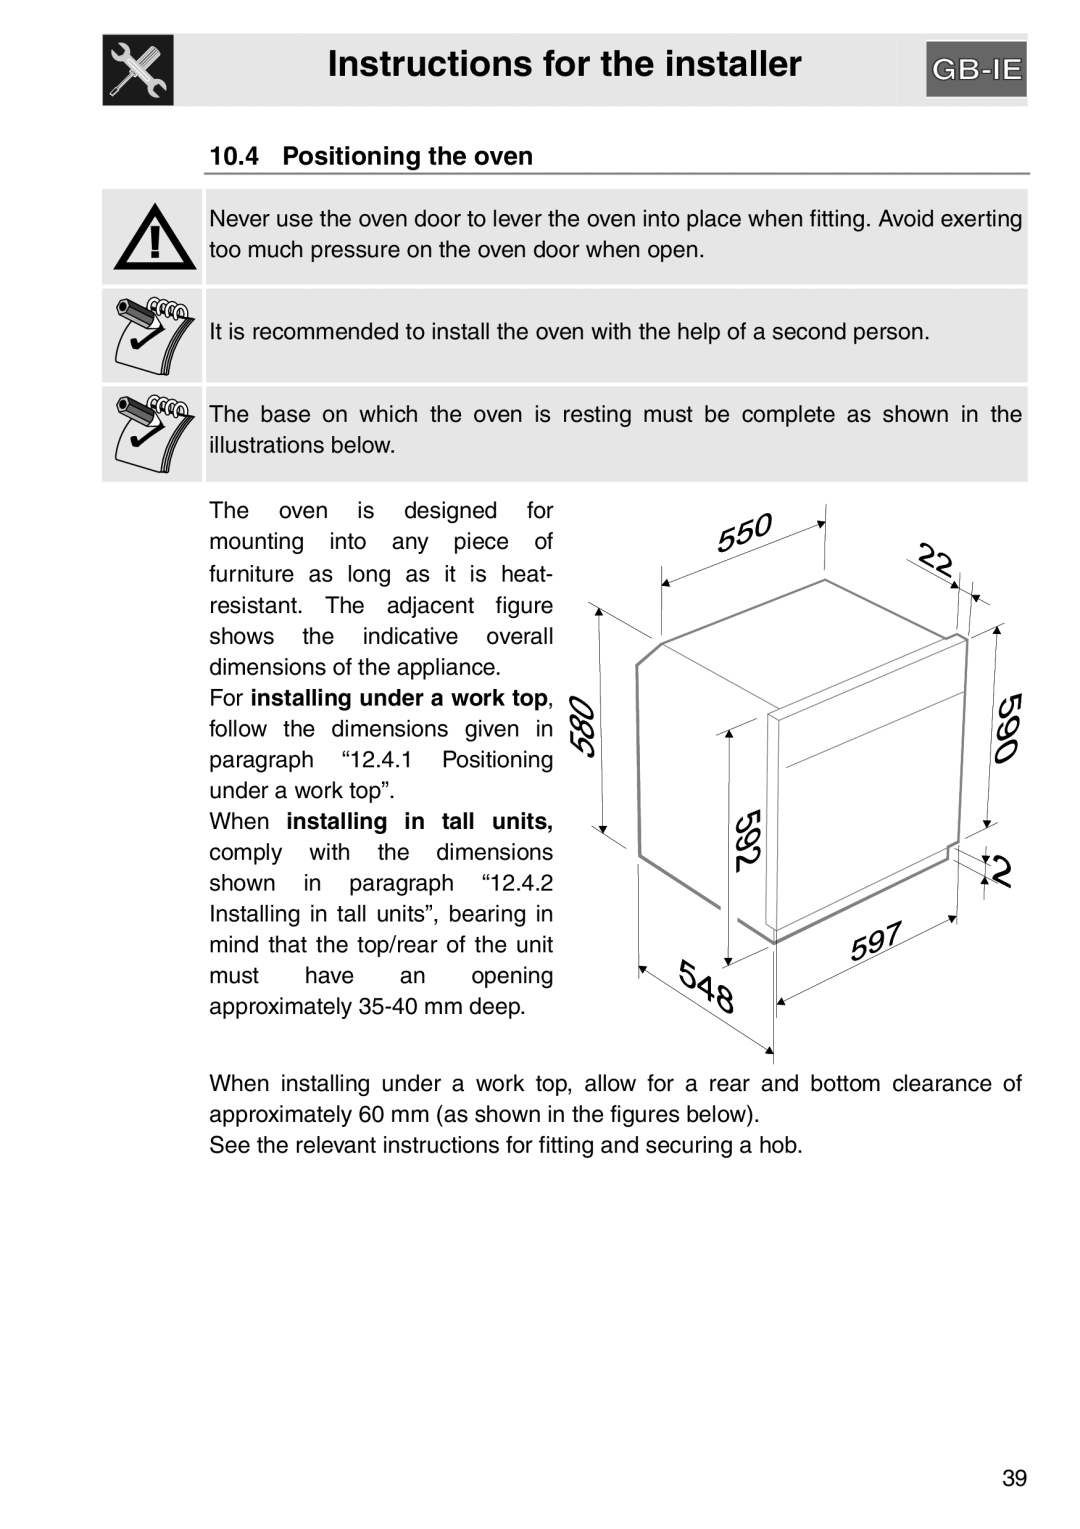 Smeg electric oven, SAP306X-9 installation instructions Positioning the oven, Instructions for the installer 